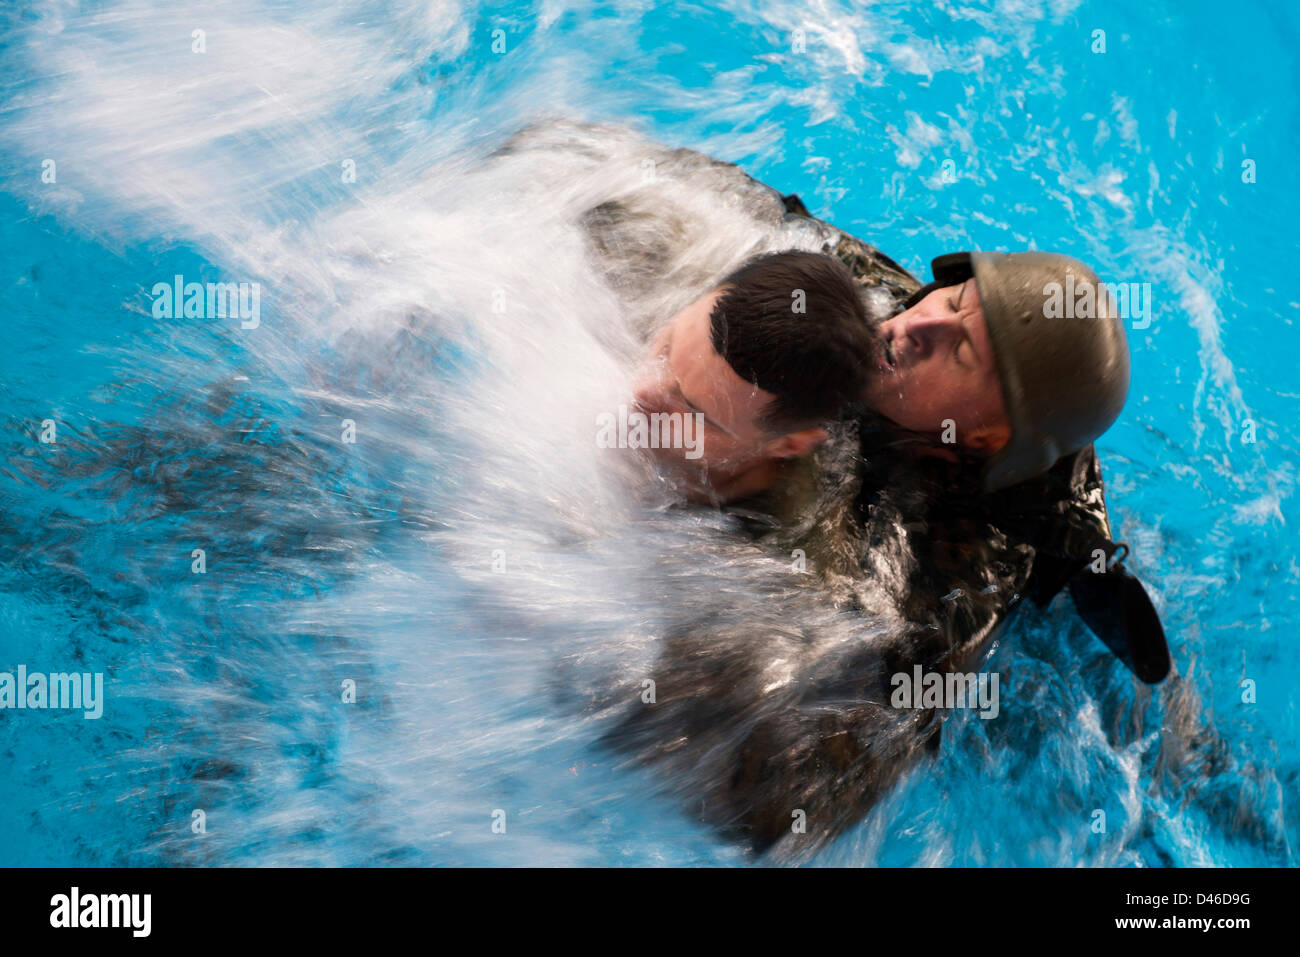 A US Marine performs a rescue drill during Marine Corps Swim Instructor Course March 5, 2013 at Marine Corps Base Camp Lejeune, NC. Stock Photo